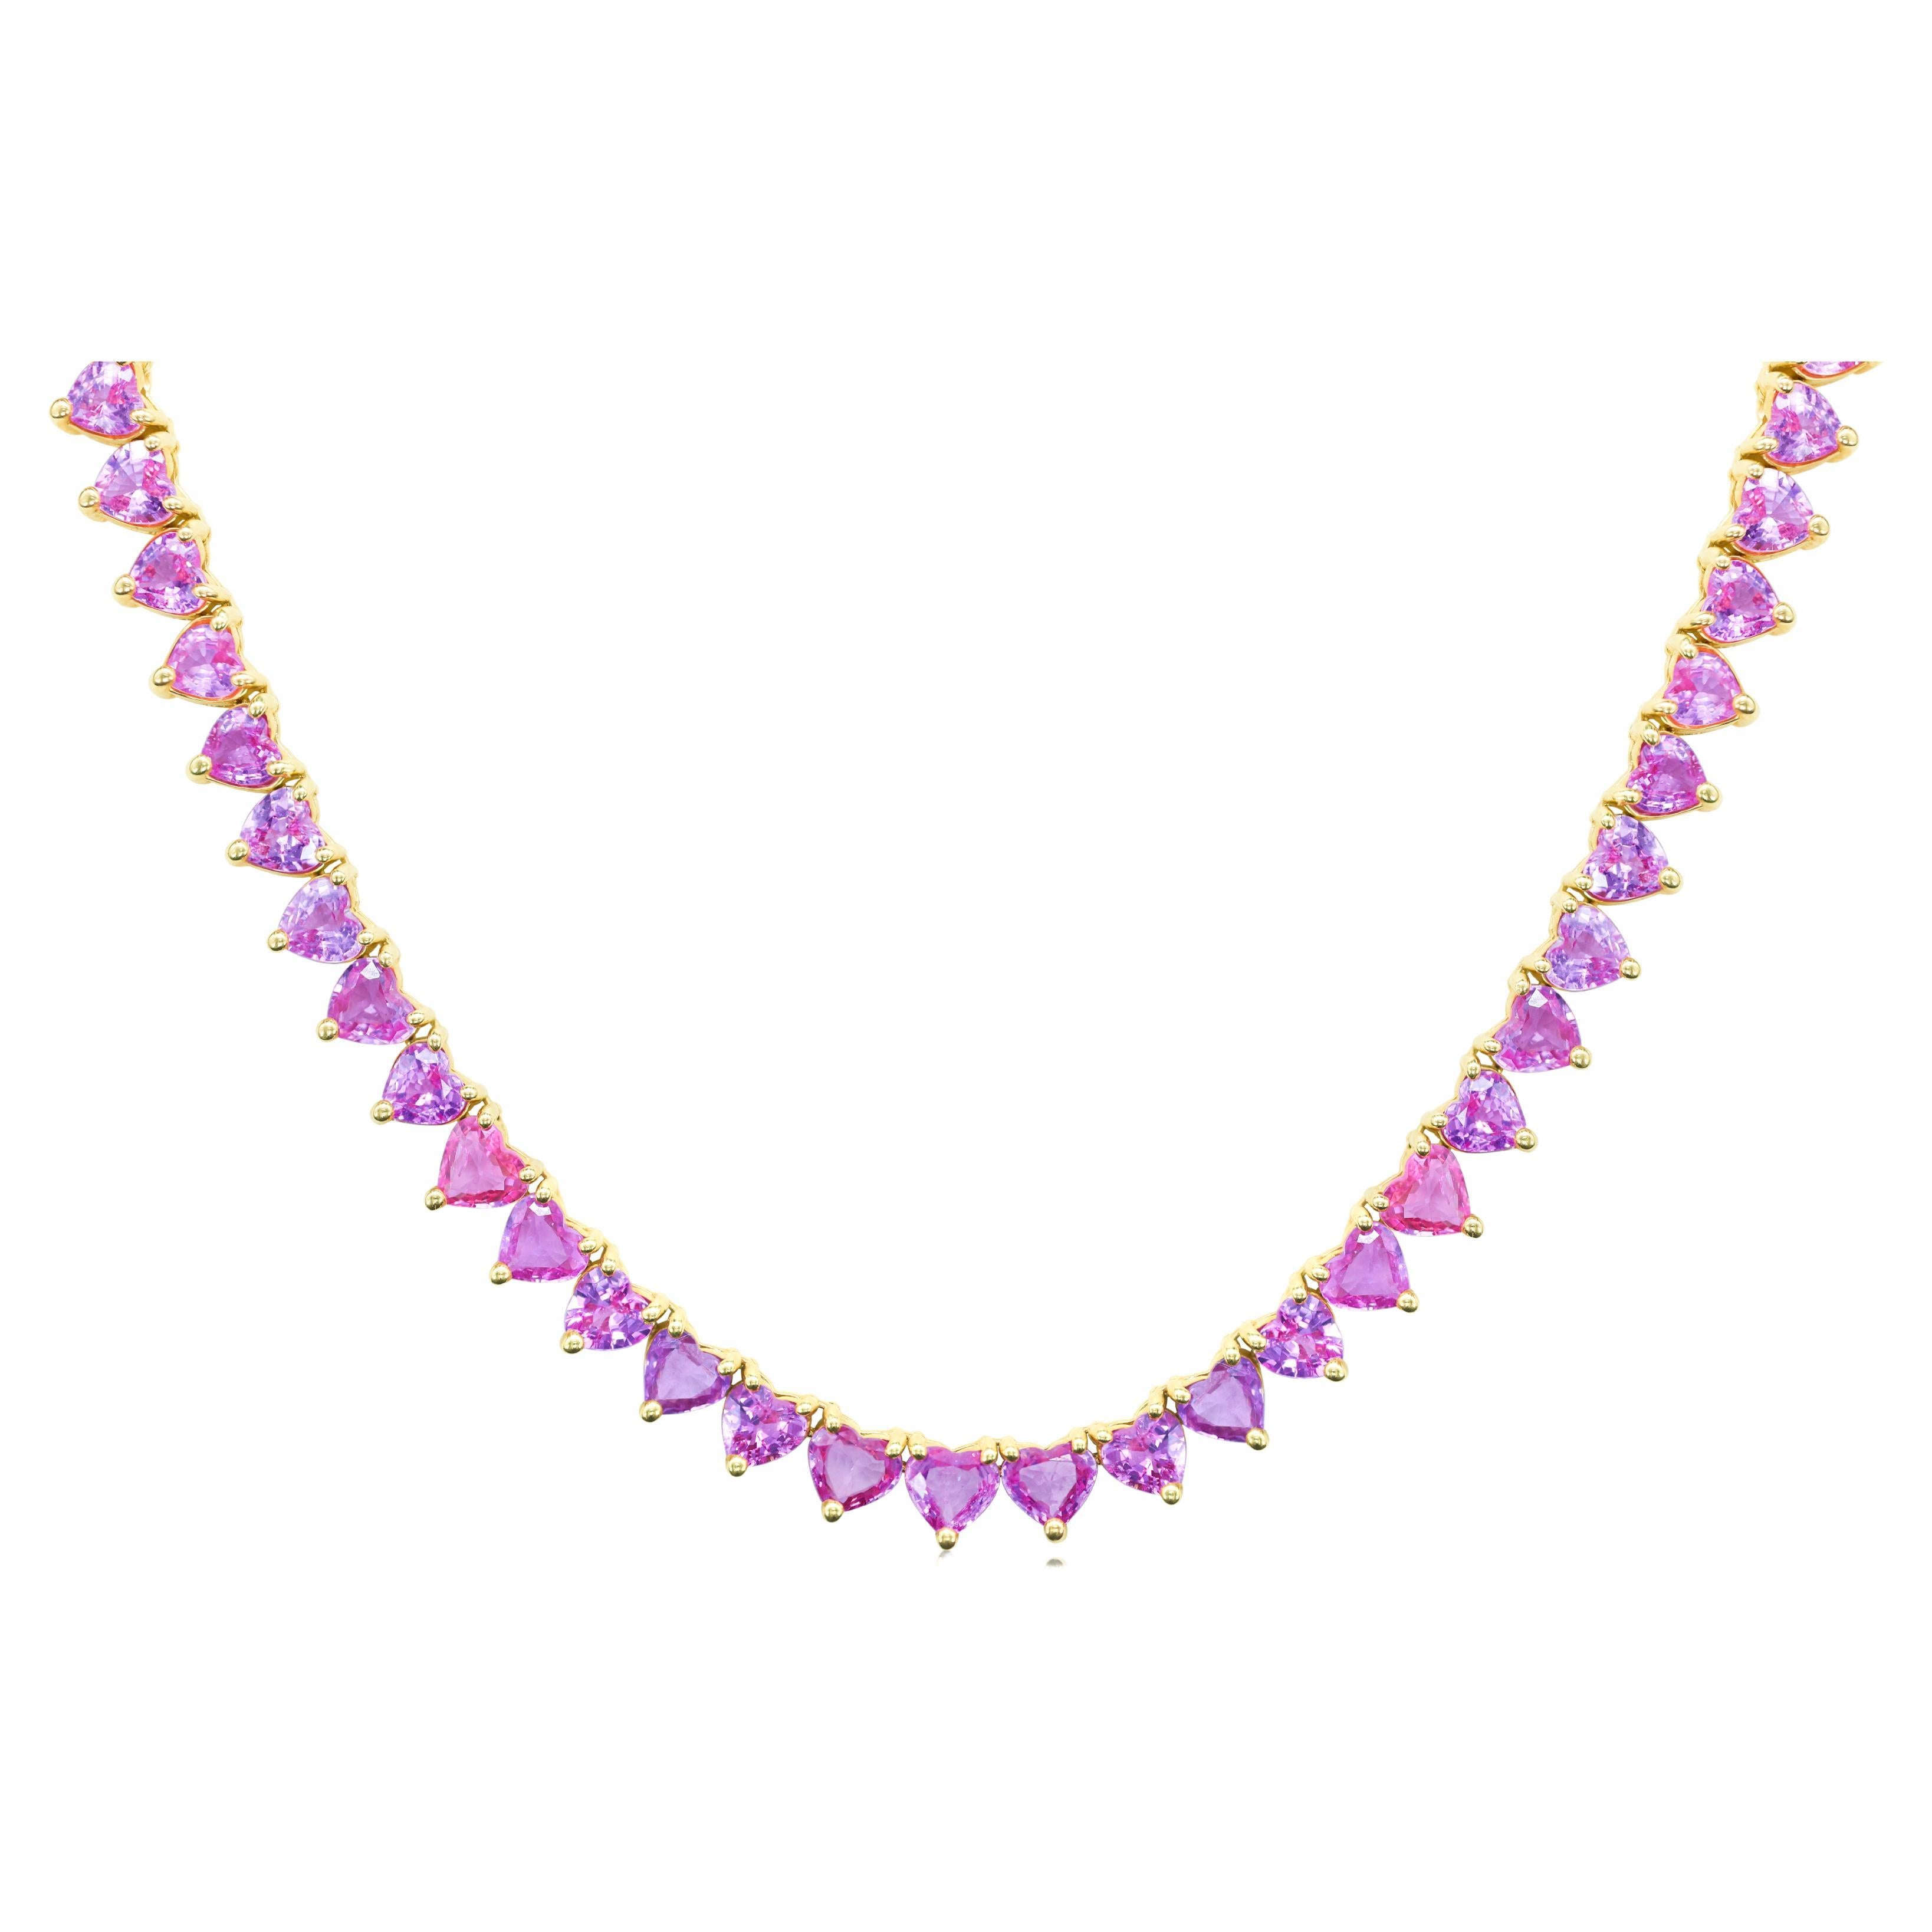 Diana M. 18kt Heart-Shaped Pink Sapphire Necklace 36.68cts Total 